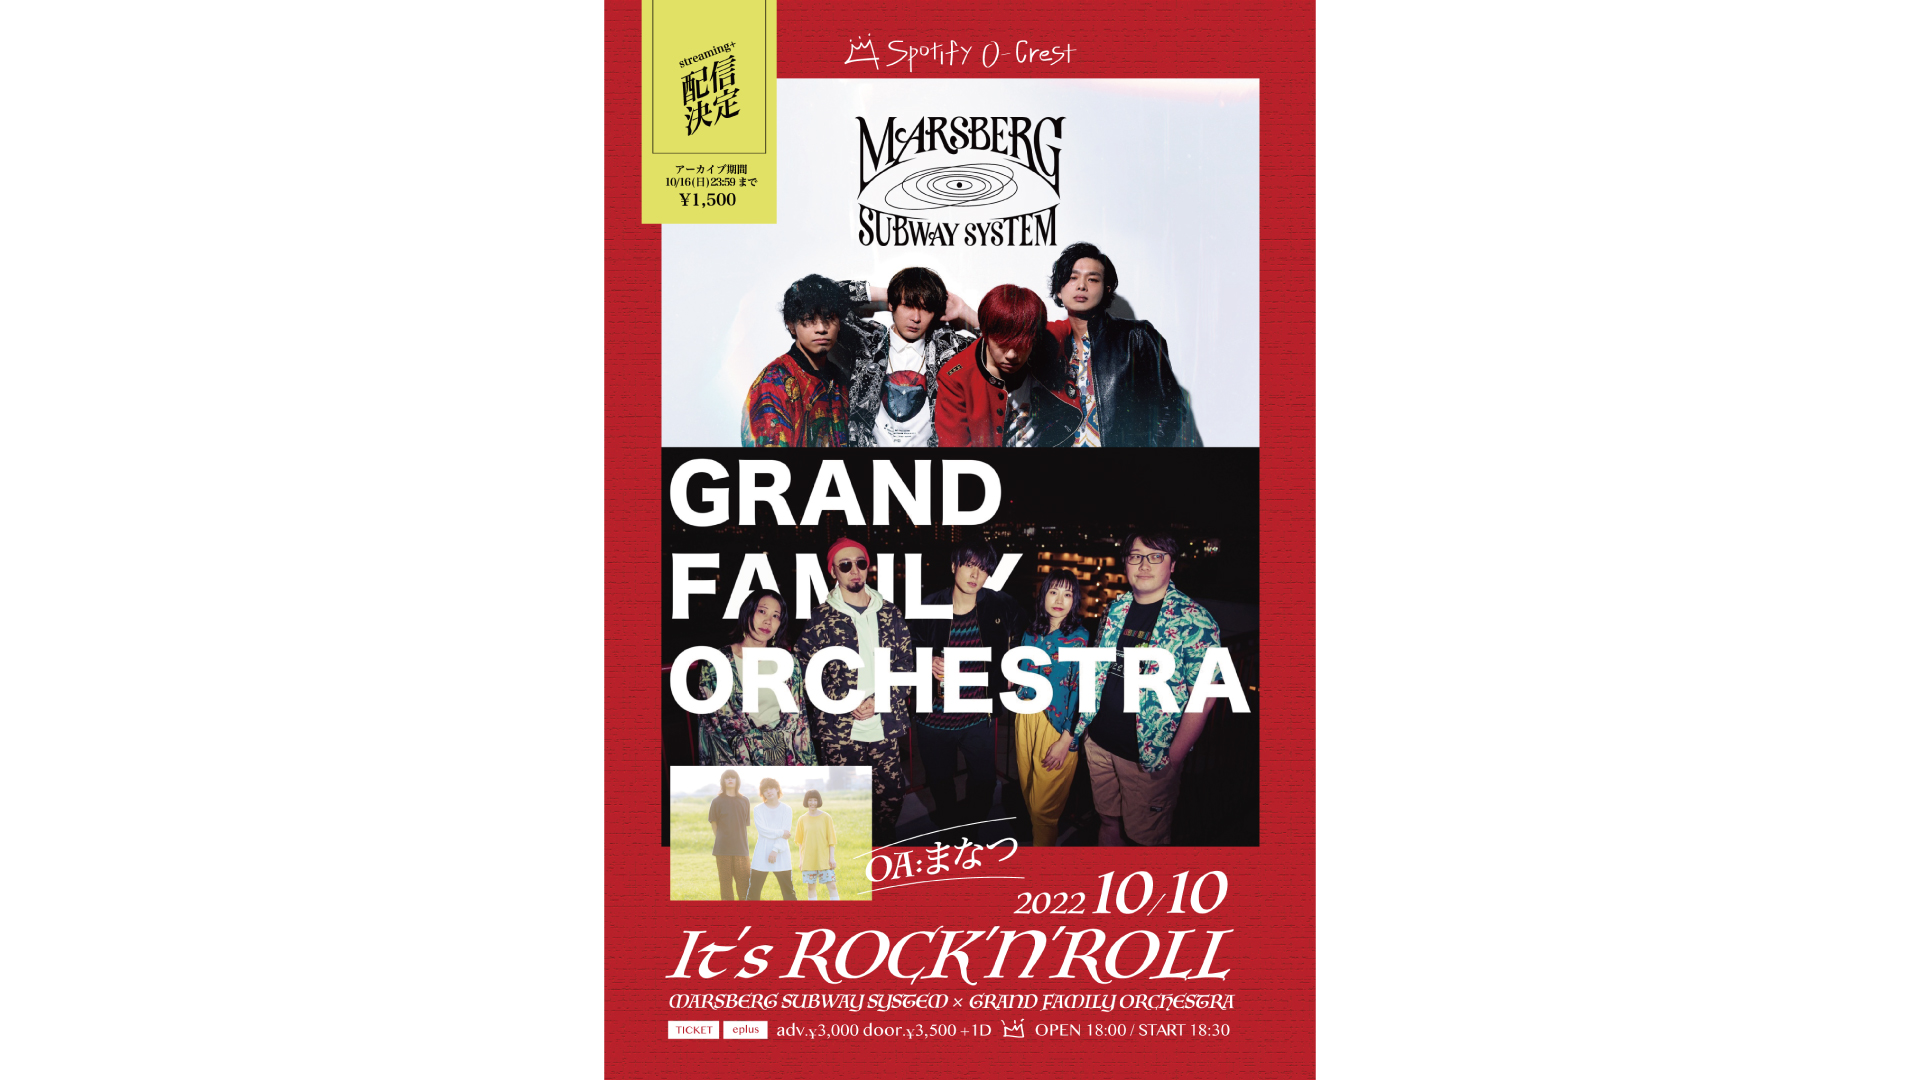 It’s ROCK’N’ROLL MARSBERG SUBWAY SYSTEM GRAND FAMILY ORCHESTRA まなつ_22/10/10